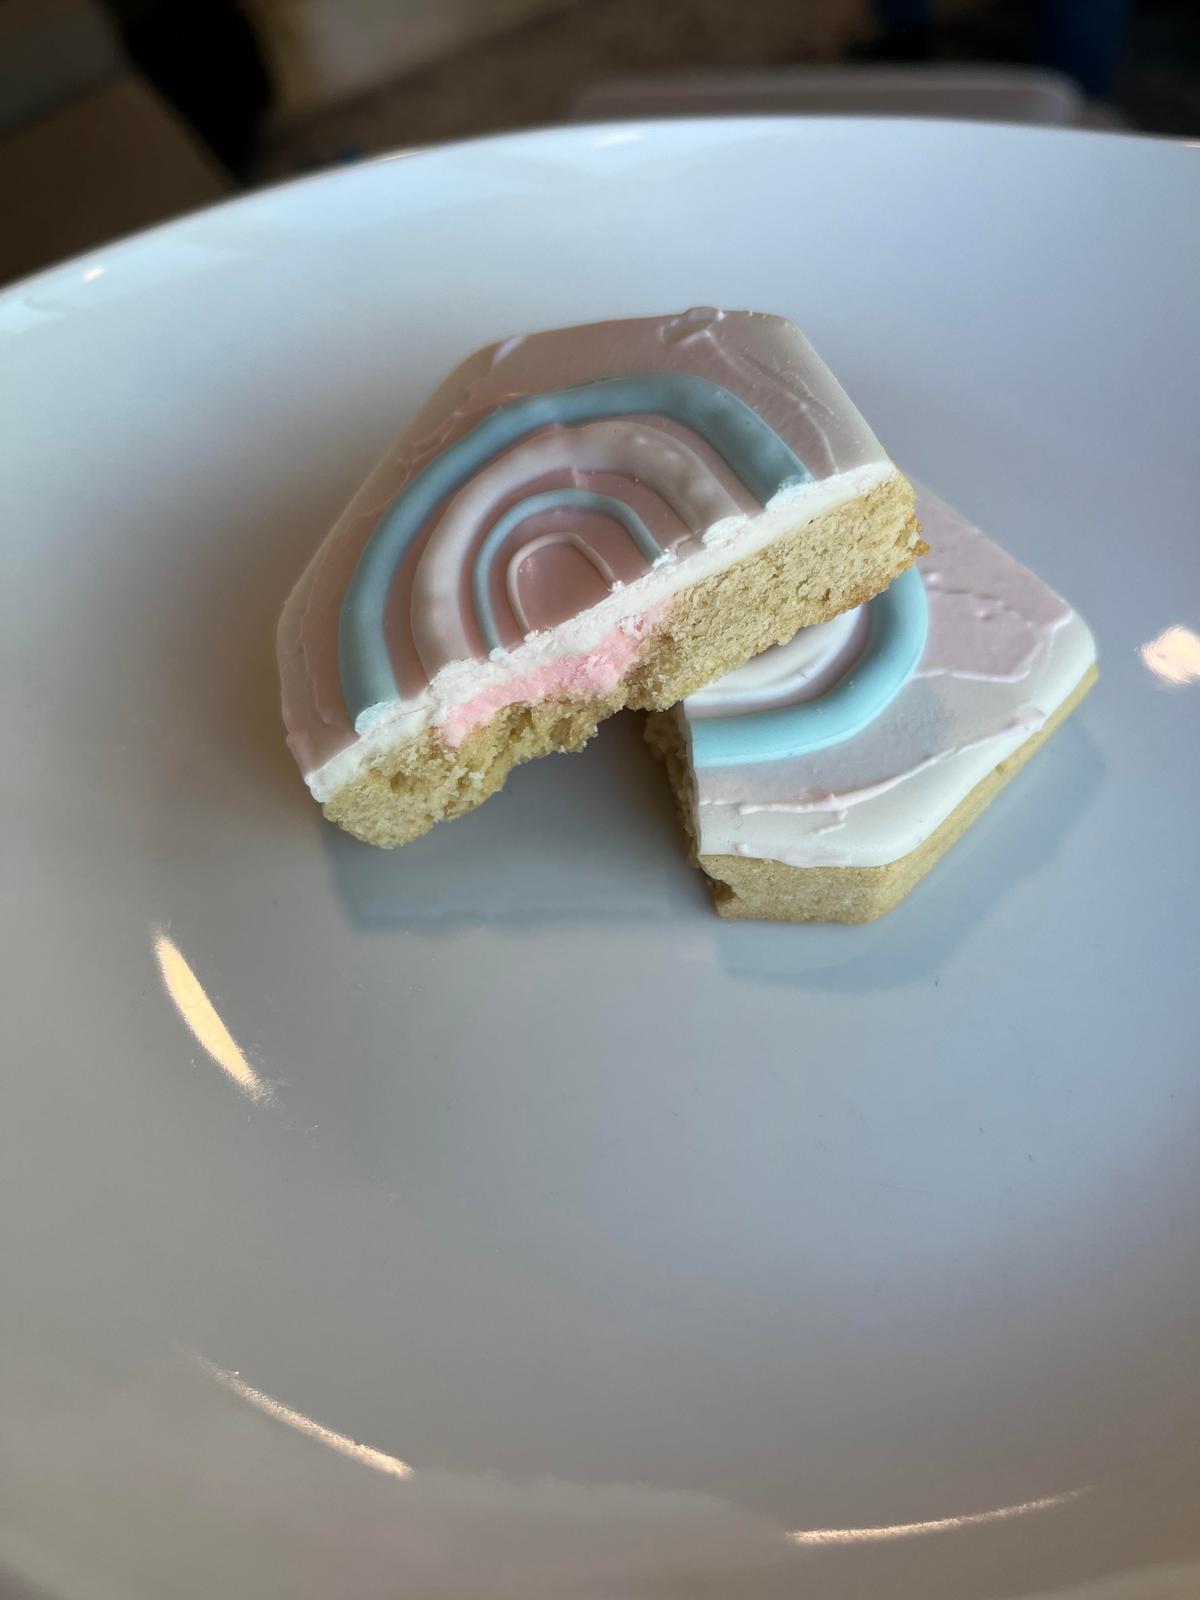 The rainbow cookies with pink frosting at the big reveal. (Courtesy of Carolyn Clark)